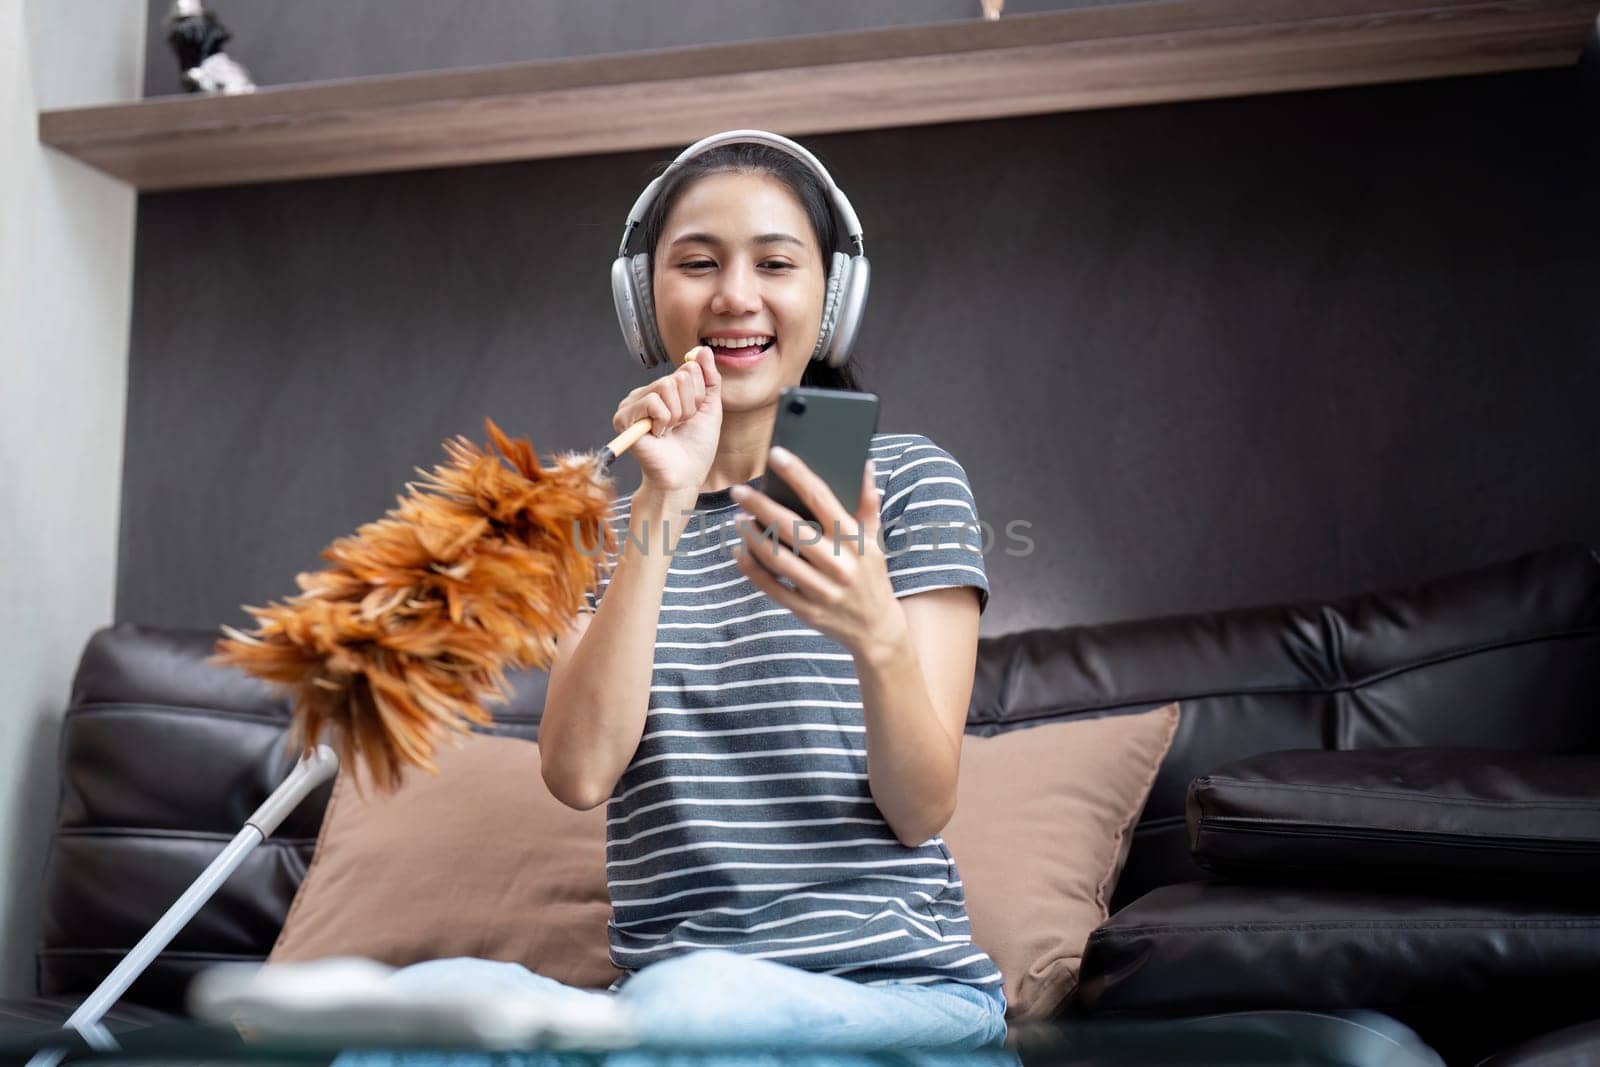 House cleaning with fun. Happy young asian housewife singing song during cleanup, using feather duster as microphone, enjoying domestic work. Young woman dancing and cleaning in living room by nateemee